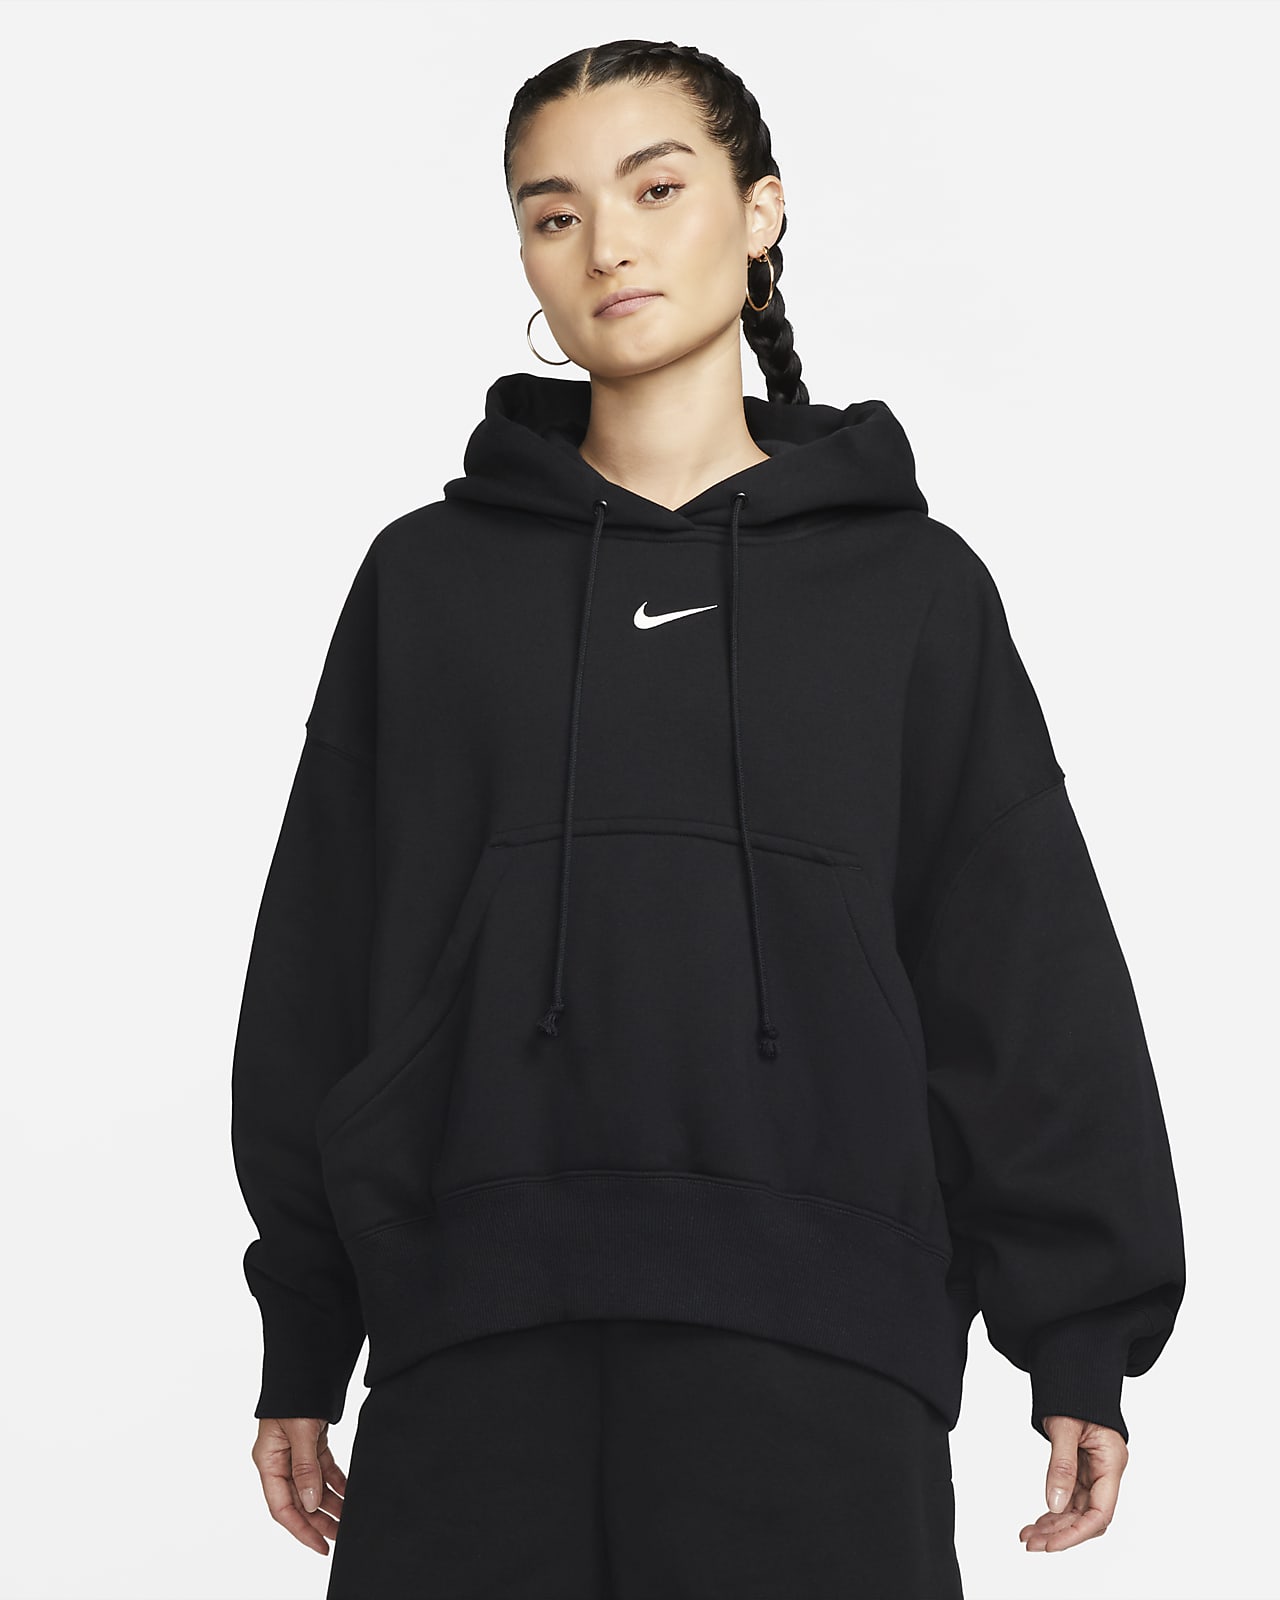 https://static.nike.com/a/images/t_PDP_1280_v1/f_auto,q_auto:eco/6ecd21b3-0f93-4f26-9828-21e4cdd2f740/sportswear-phoenix-fleece-over-oversized-pullover-hoodie-dQwrzN.png